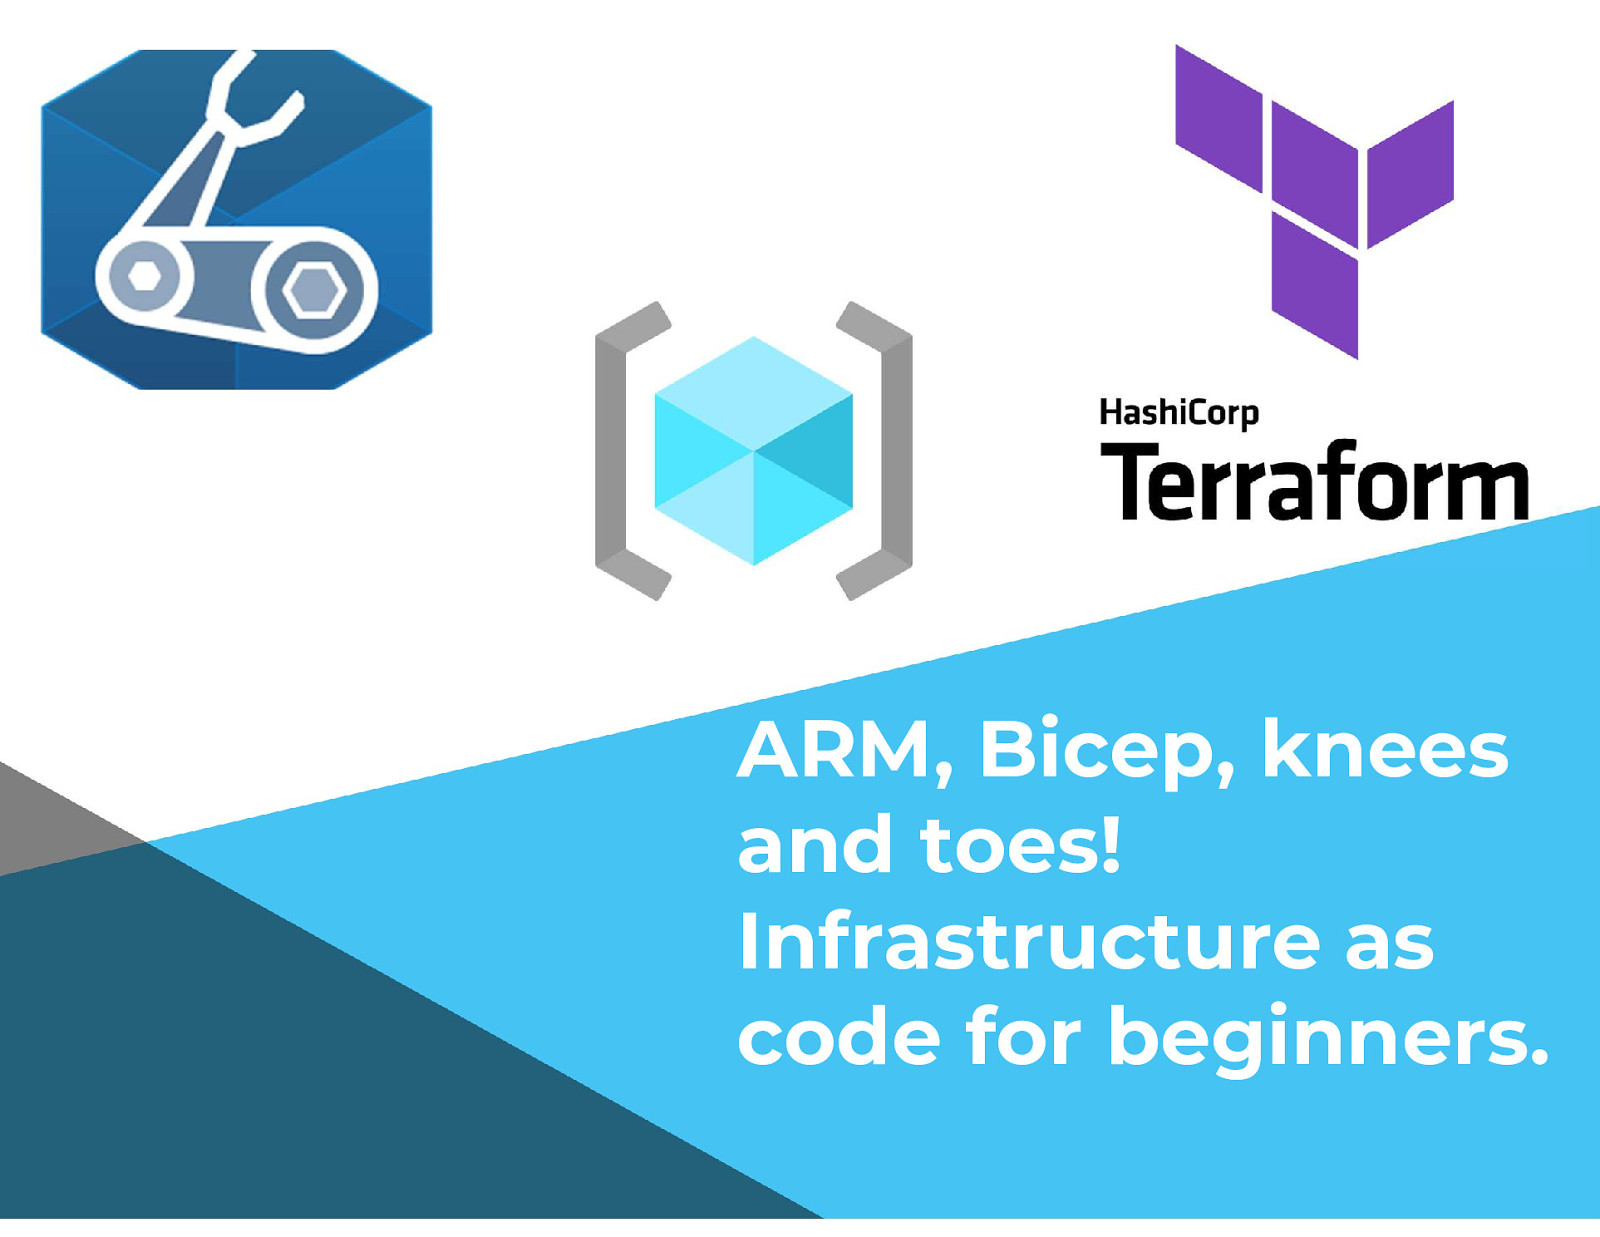 ARM, Bicep, knees and toes! Infrastructure as code for beginners.